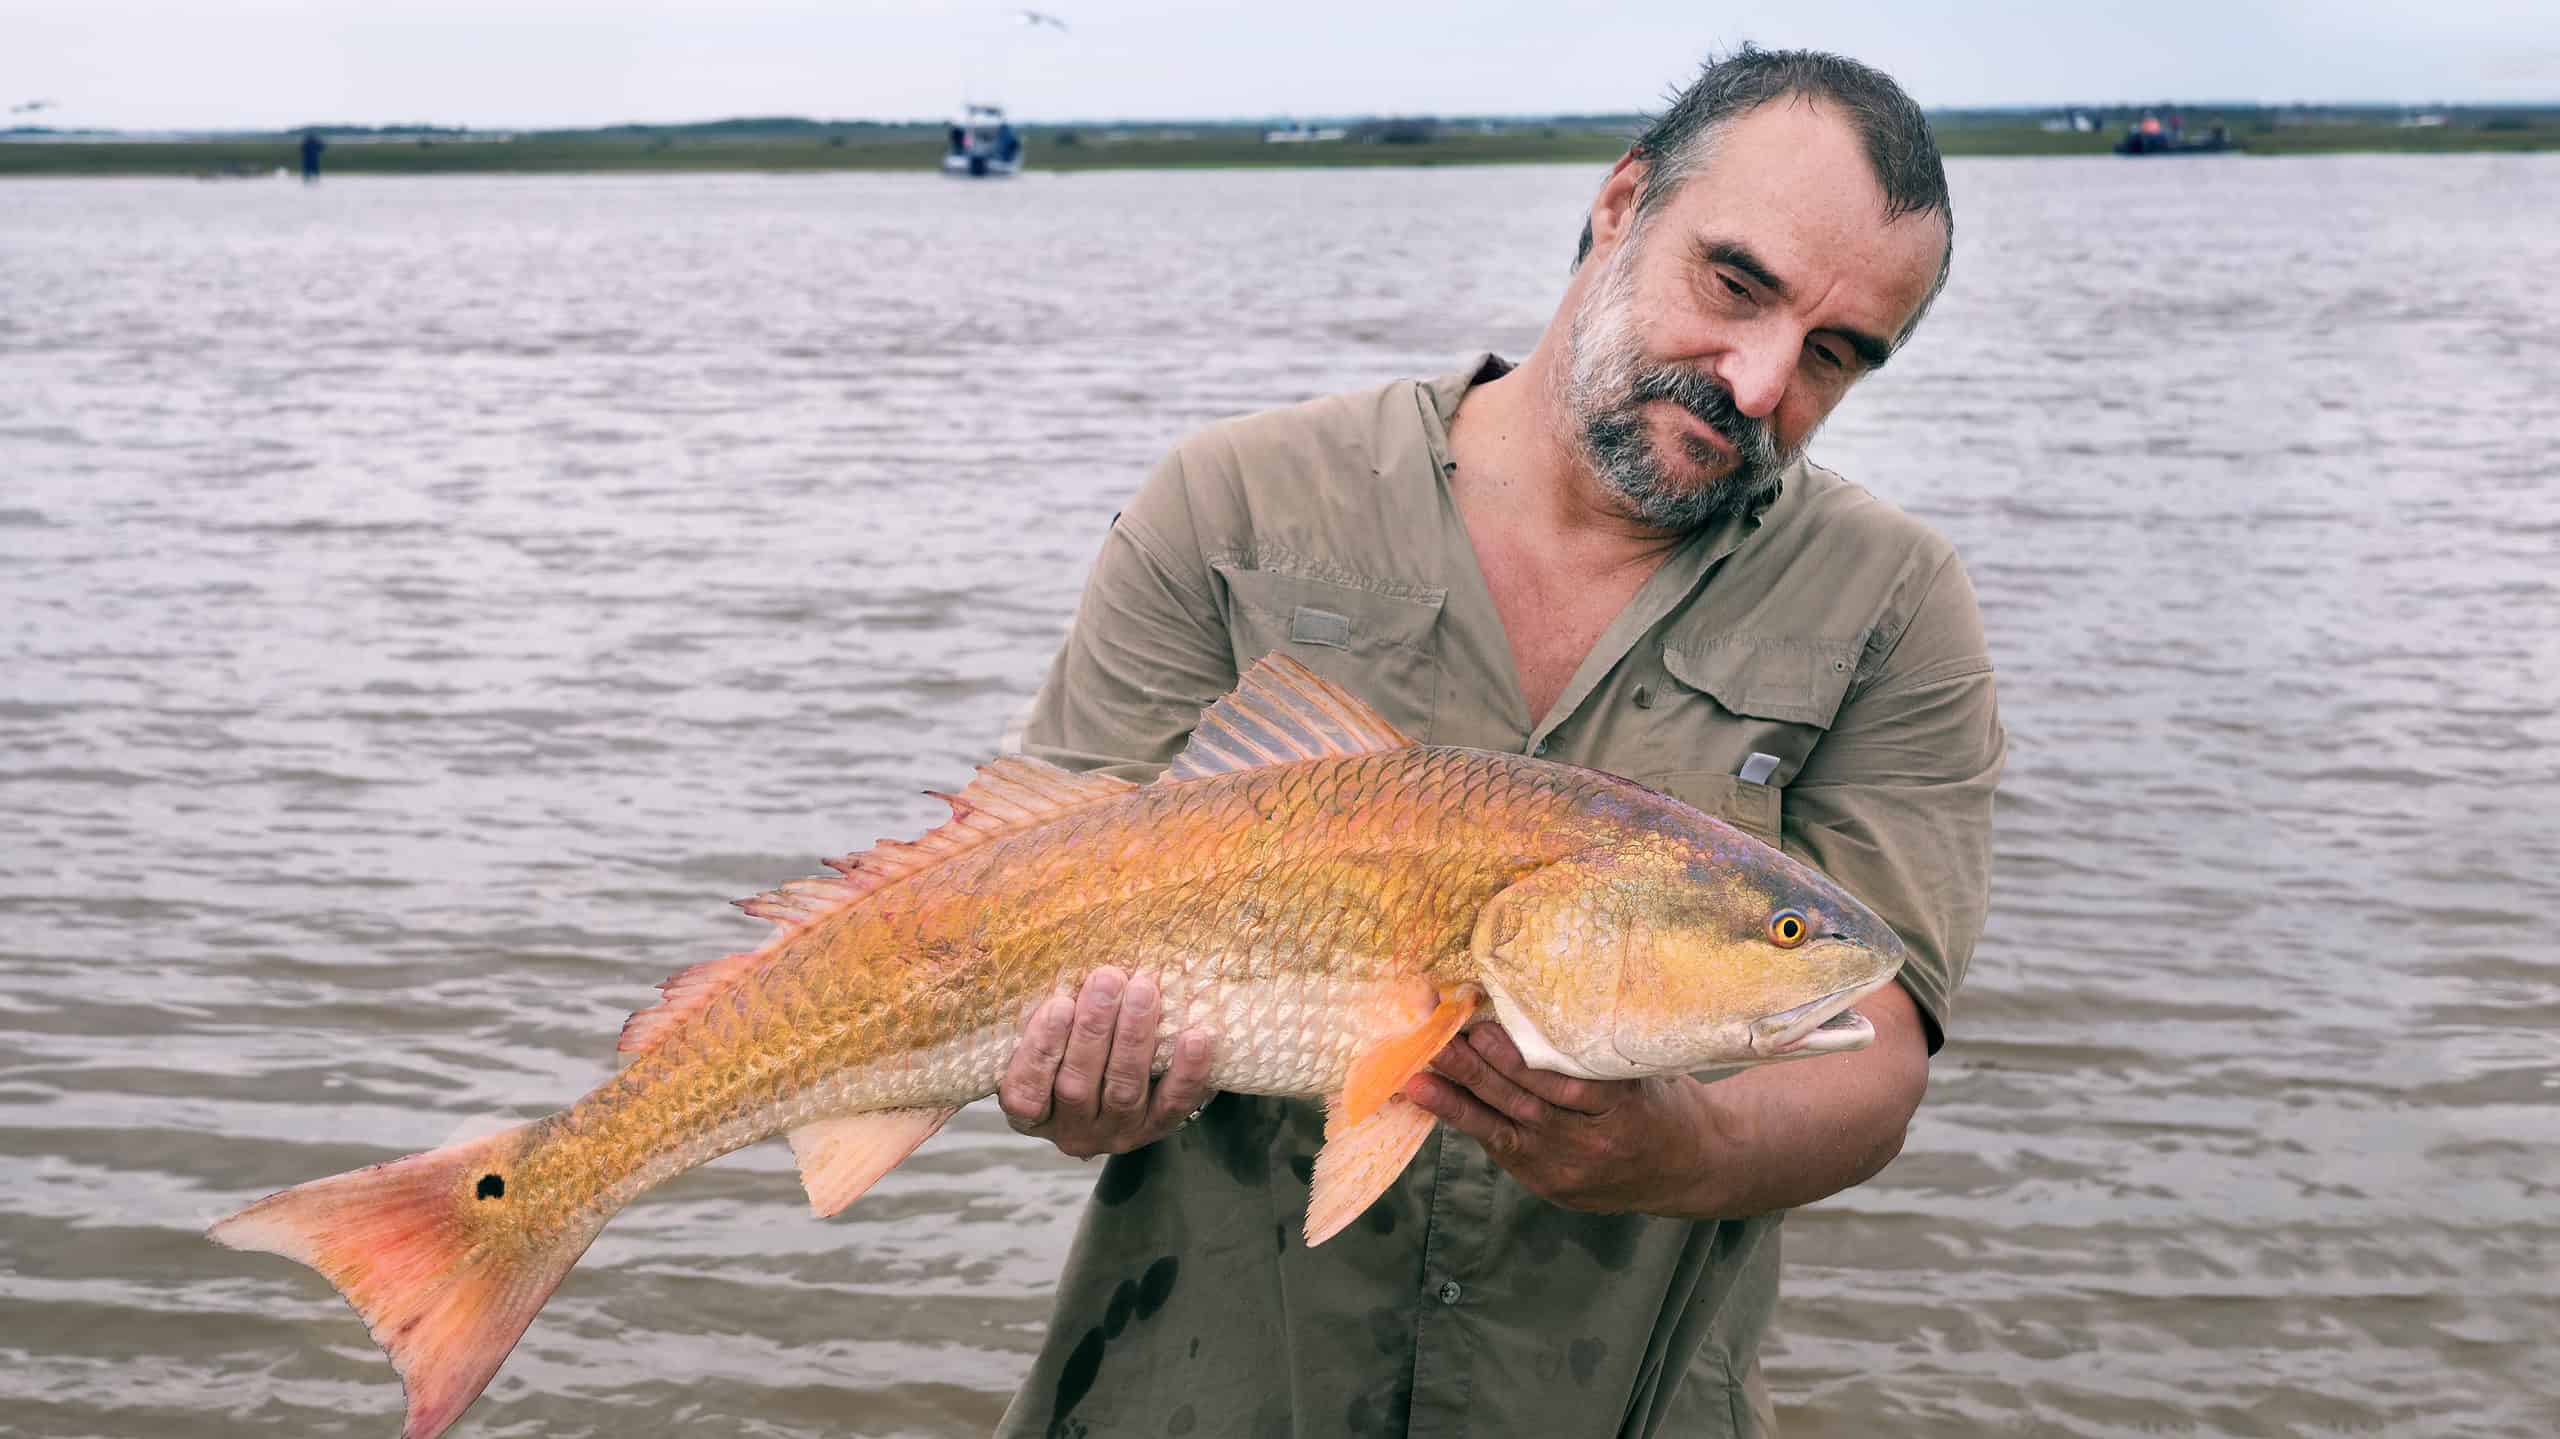 Man holding a large red drum